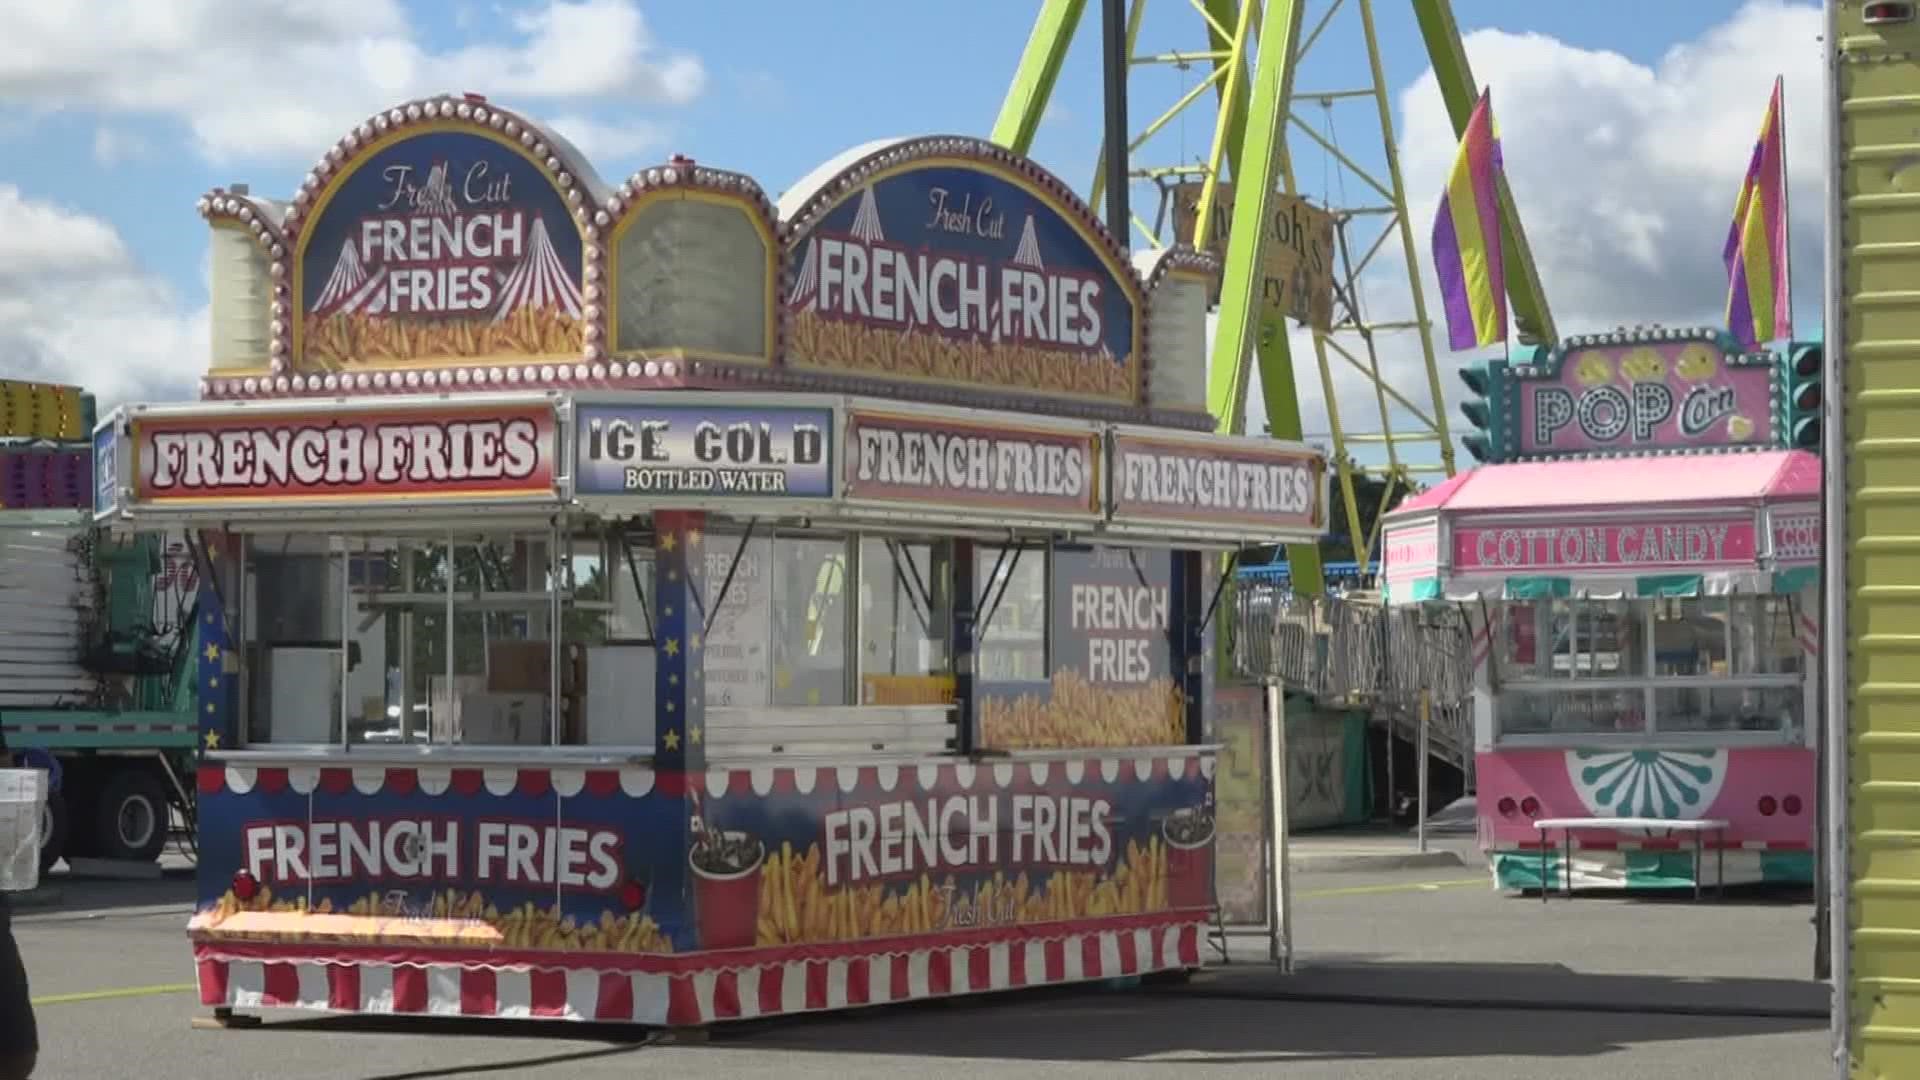 This year, the fair is four days long and features more than 25 rides for fairgoers to enjoy.